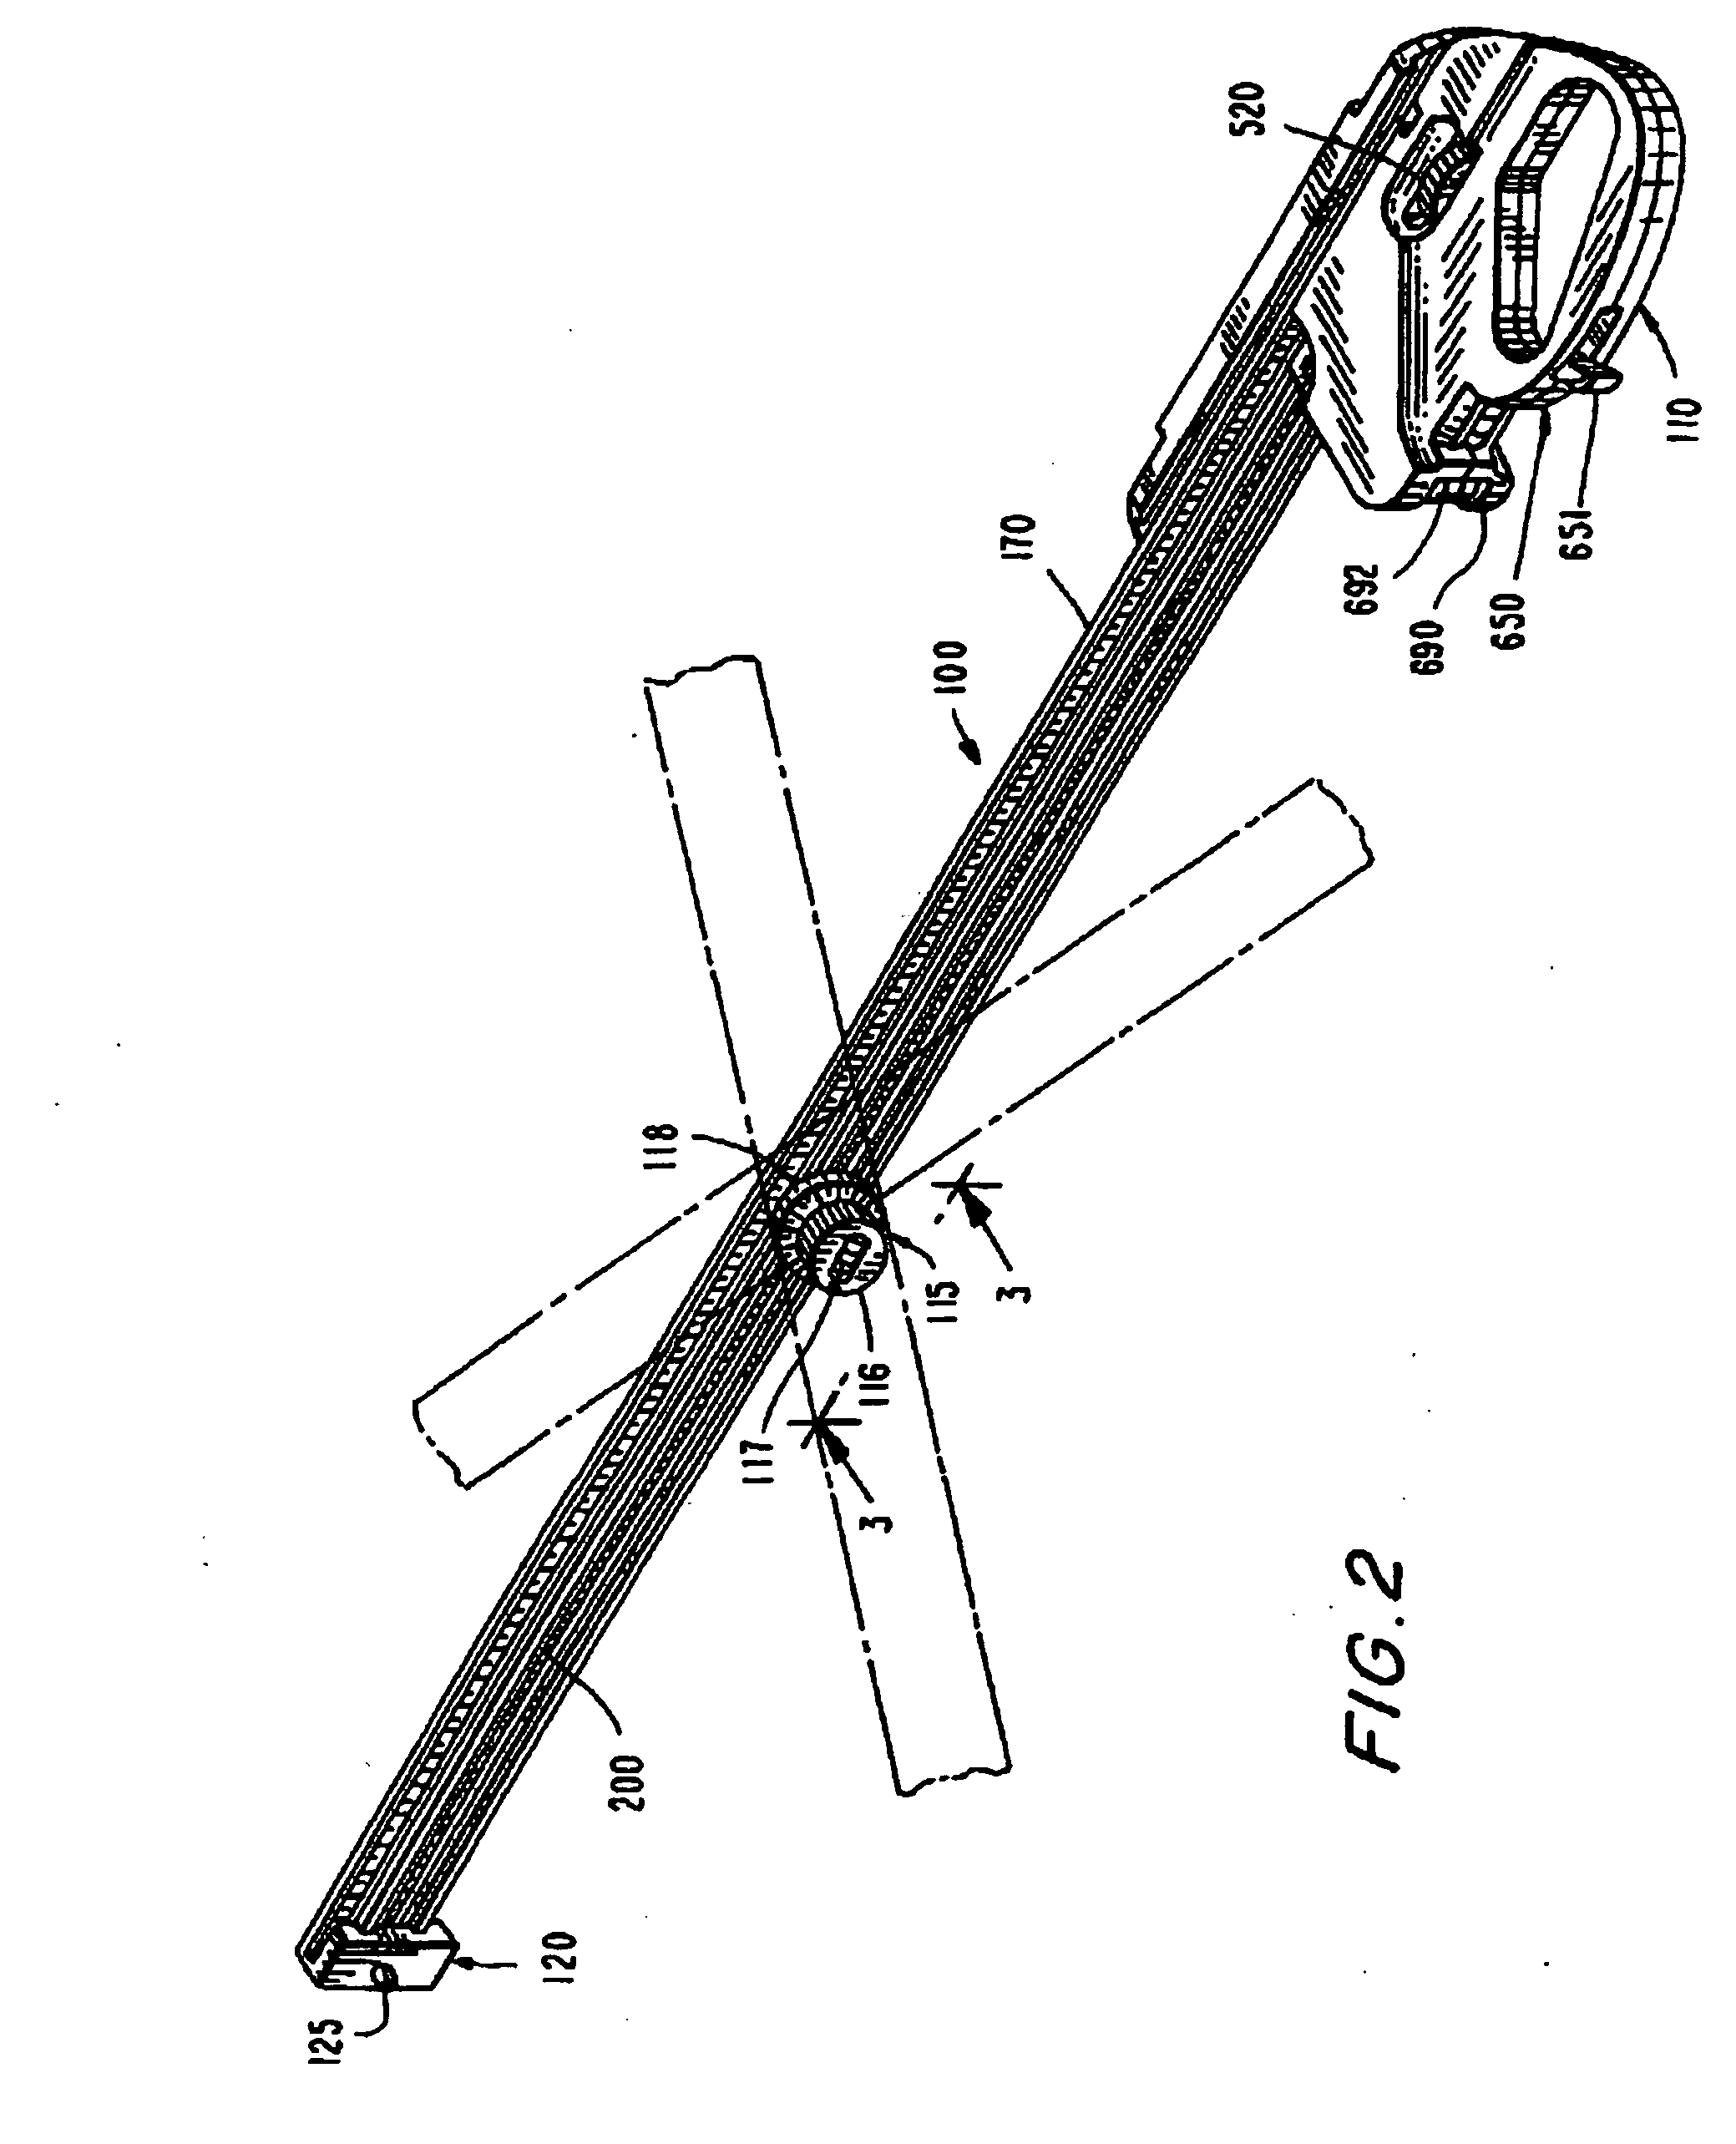 Line-marking device with positioning devices and trigger activator